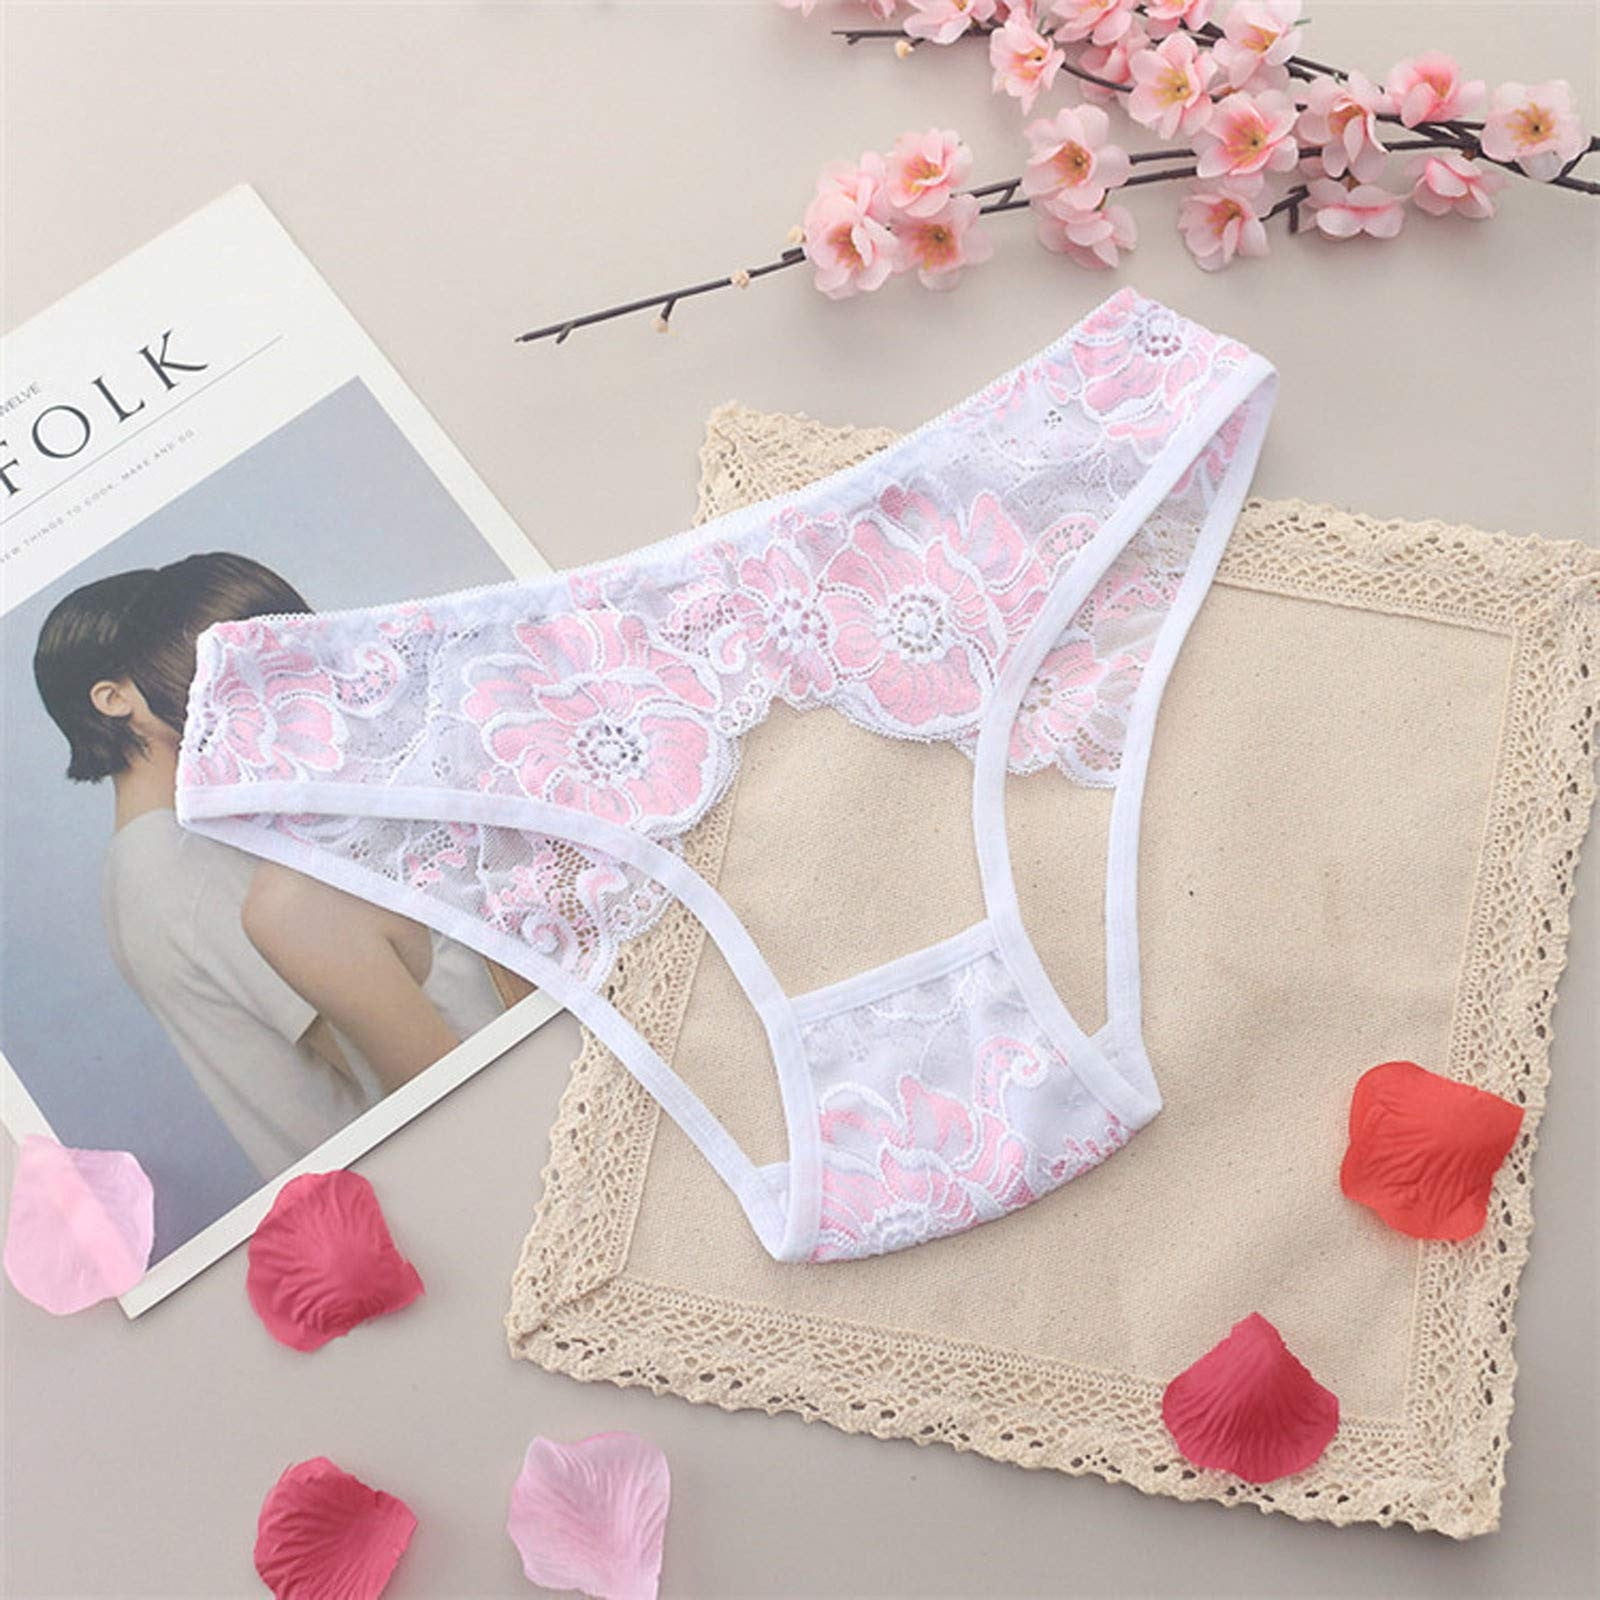 Lopecy-Sta Women Cutut Lace Underwear Briefs Panties Floral Embroidery Sexy  Hollow Out Lingerie Underpants Discount Clearance Womens Underwear Birthday  Present White 